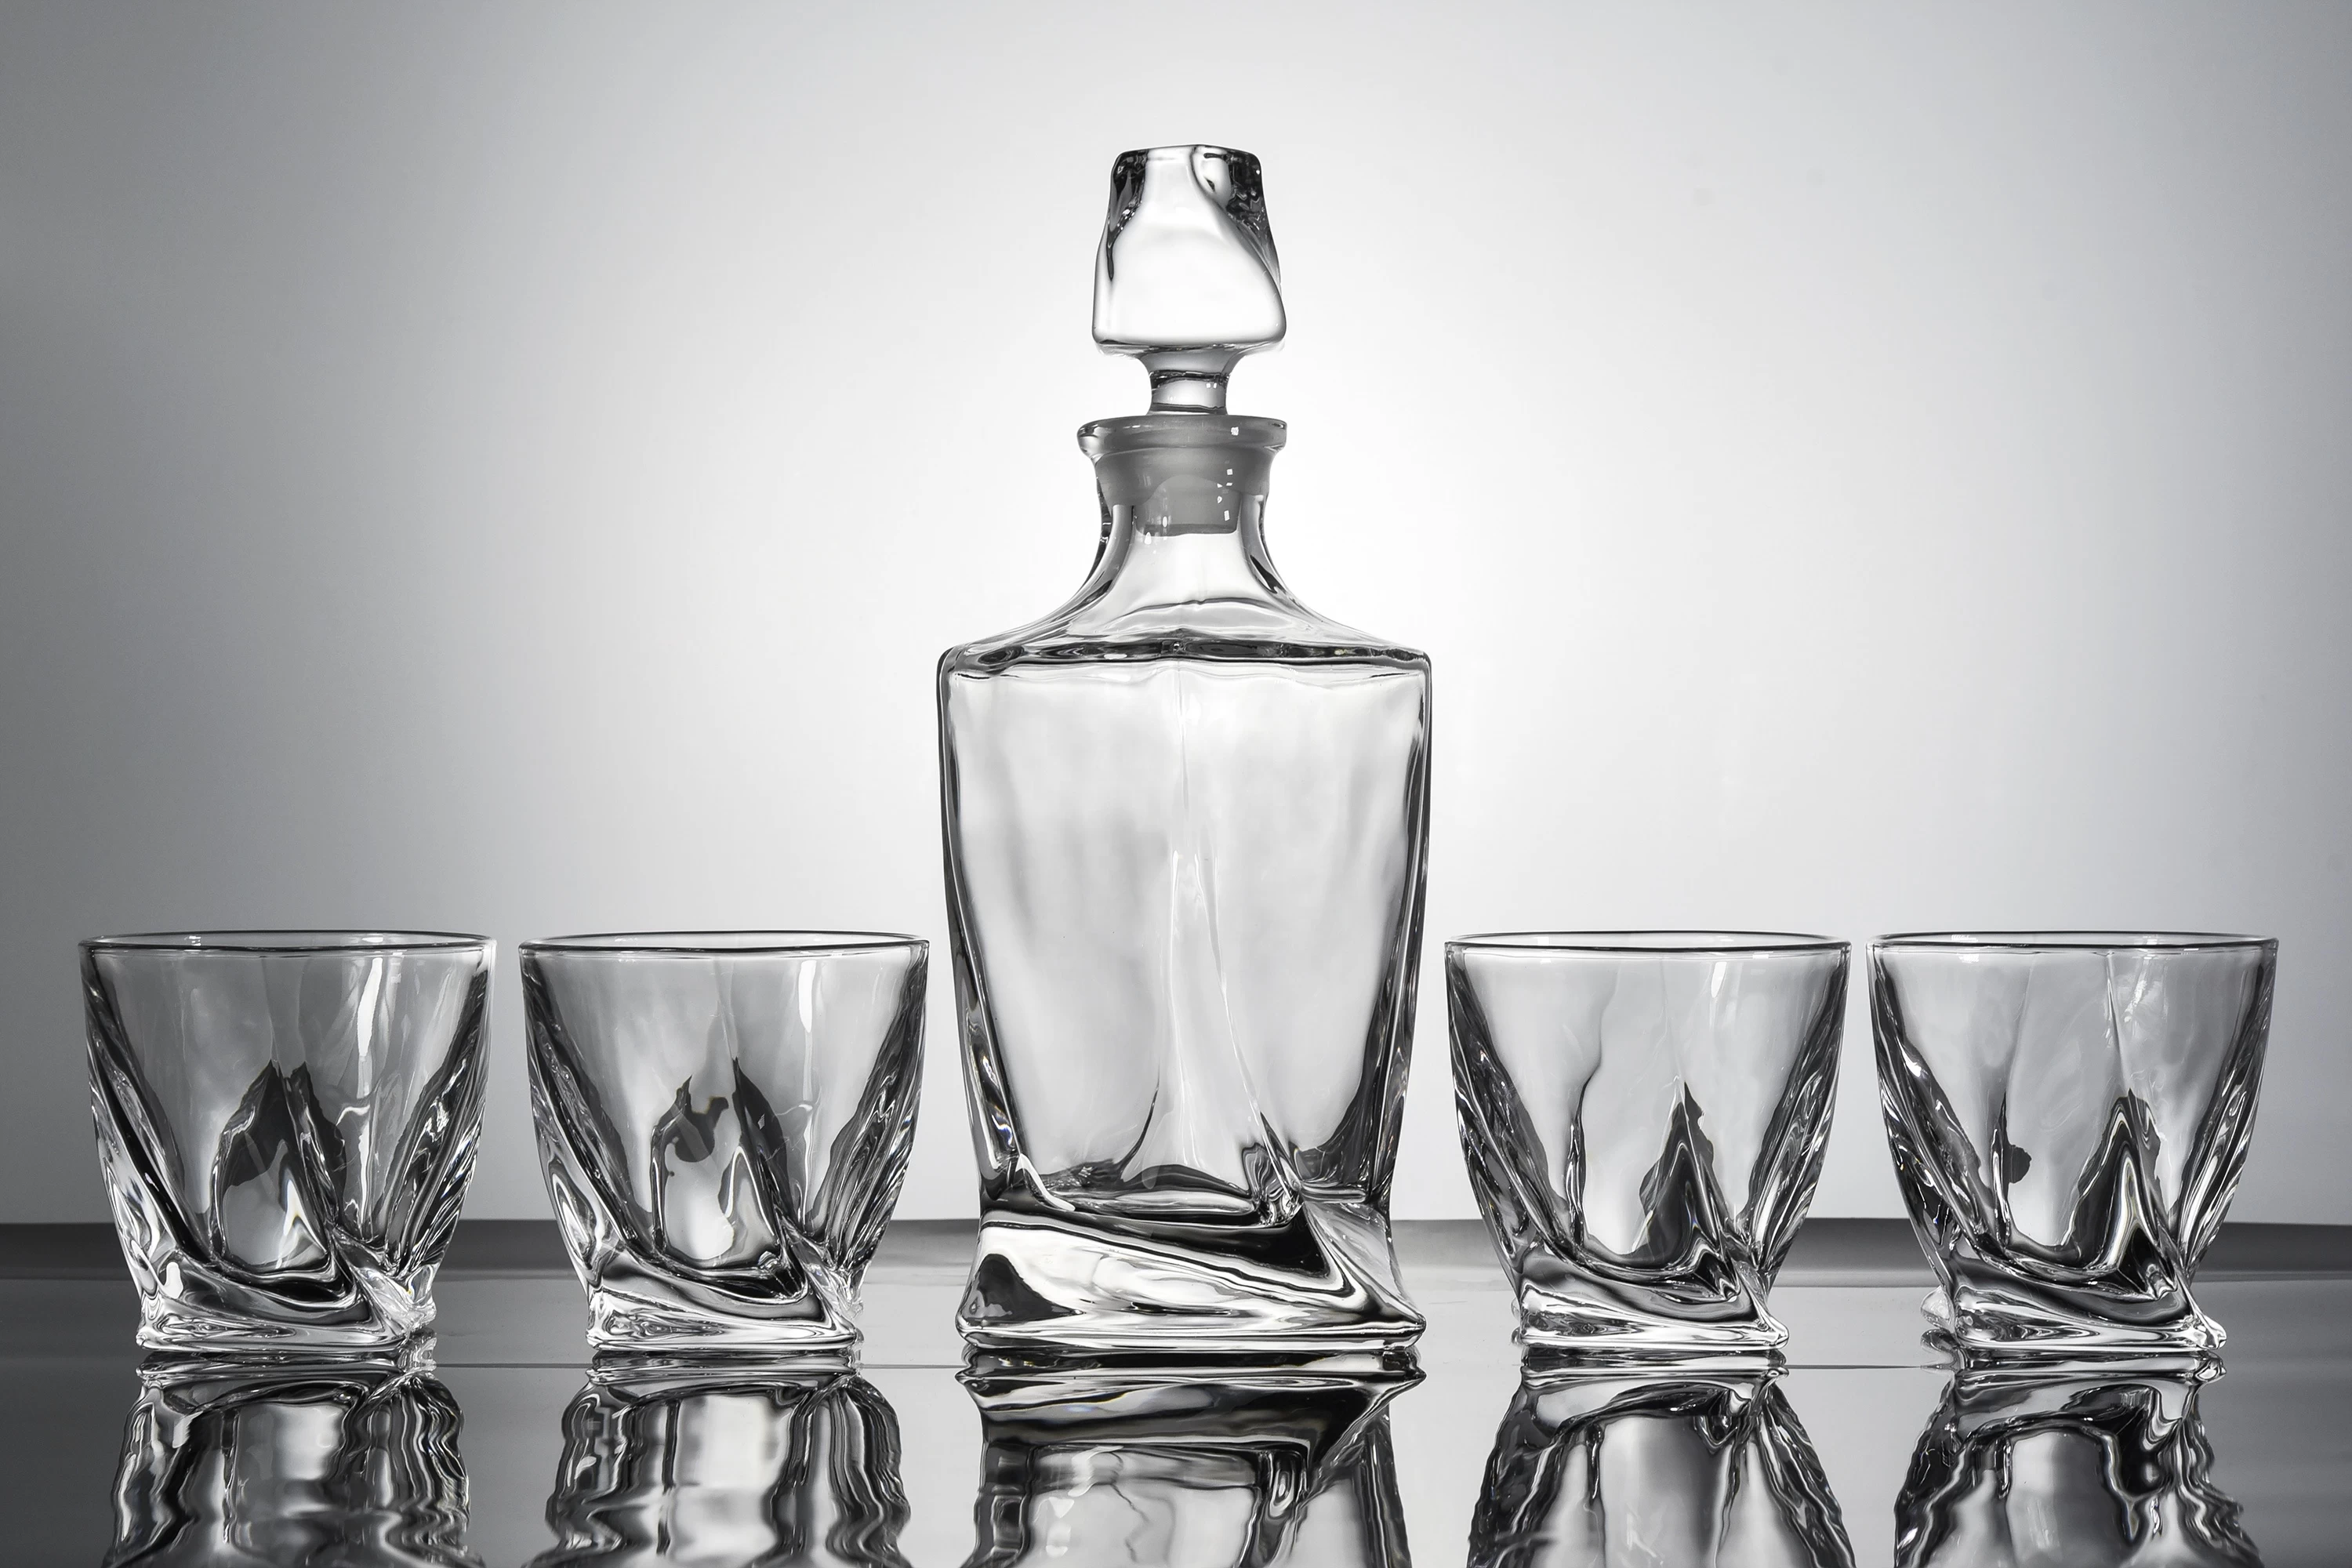 5 pieces in stock Glass whiskey bottle cup sets